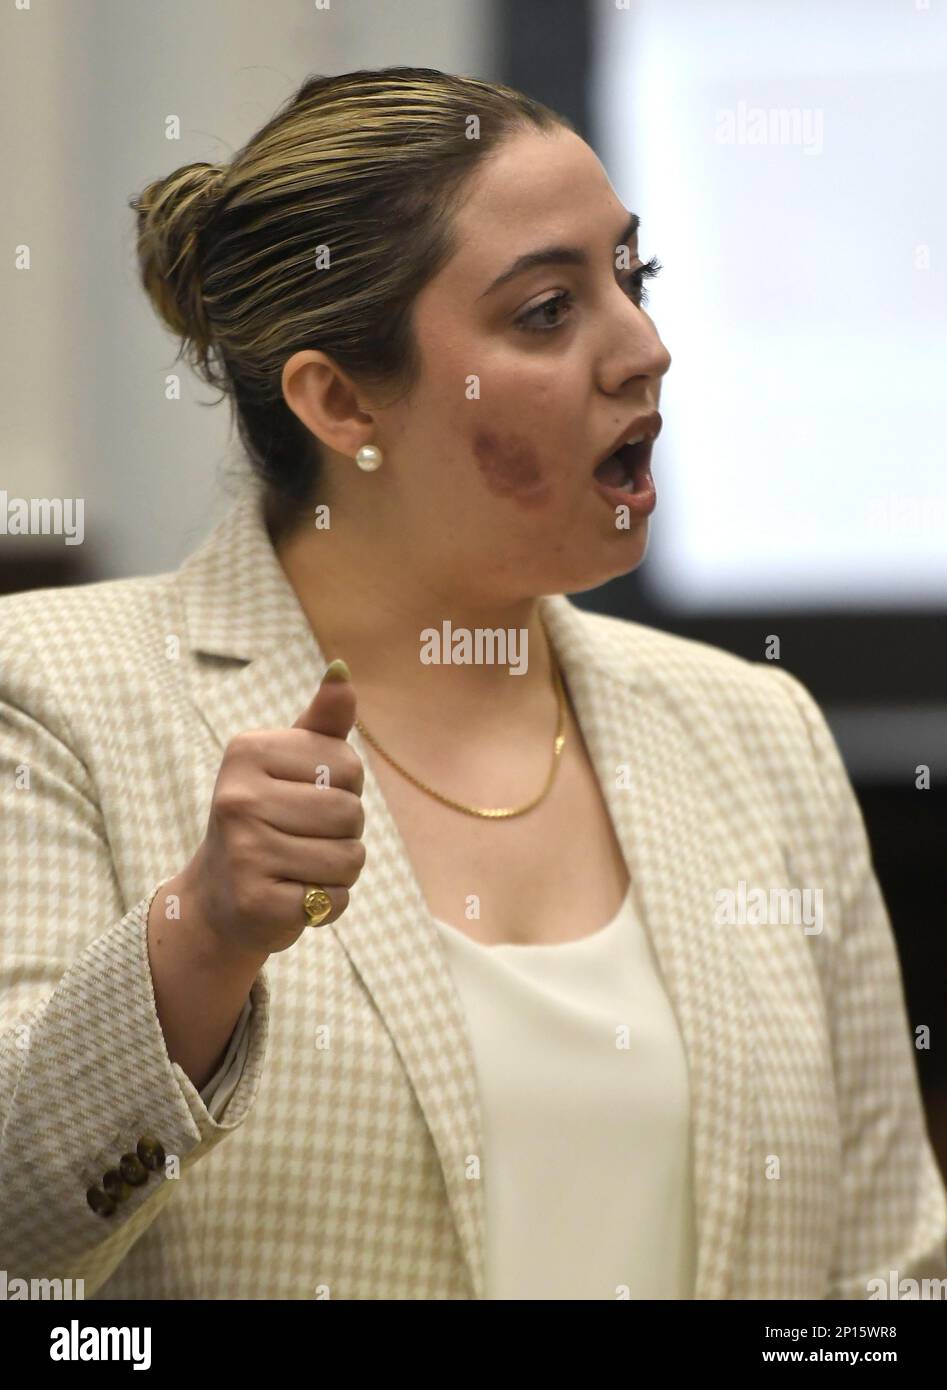 Nicole Muller, an attorney for Zachariah Anderson, gives the defense's opening statement during Anderson's trial at the Kenosha County Courthouse in Kenosha, Wis., on Thursday, Feb. 2, 2023. (Sean Krajacic/The Kenosha News via AP) Stockfoto